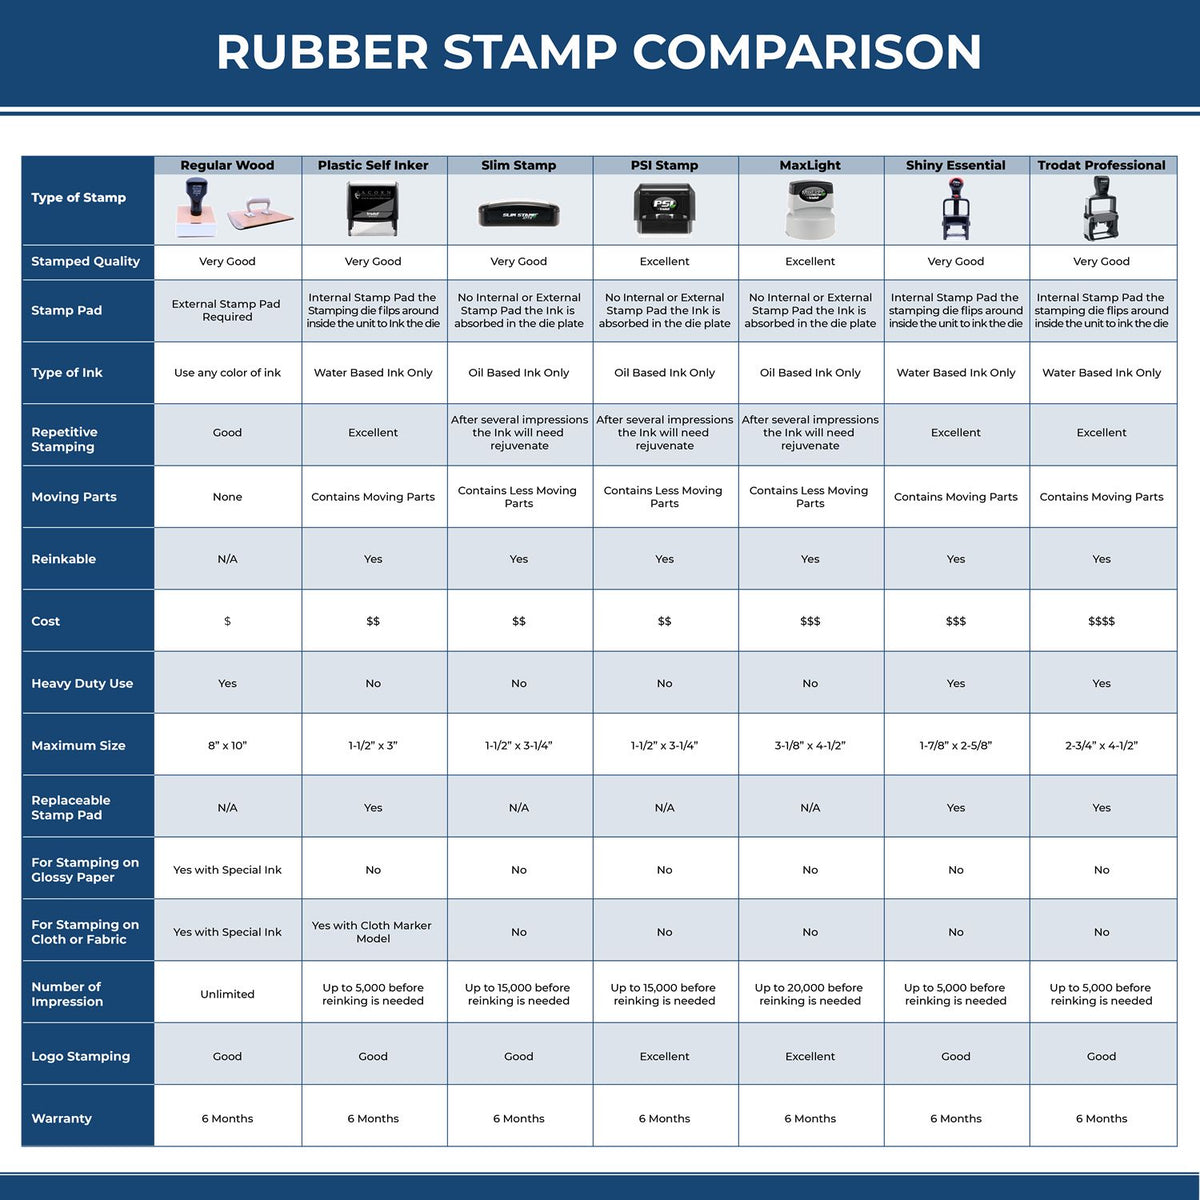 Large First Class Mail International Rubber Stamp 4974R Rubber Stamp Comparison